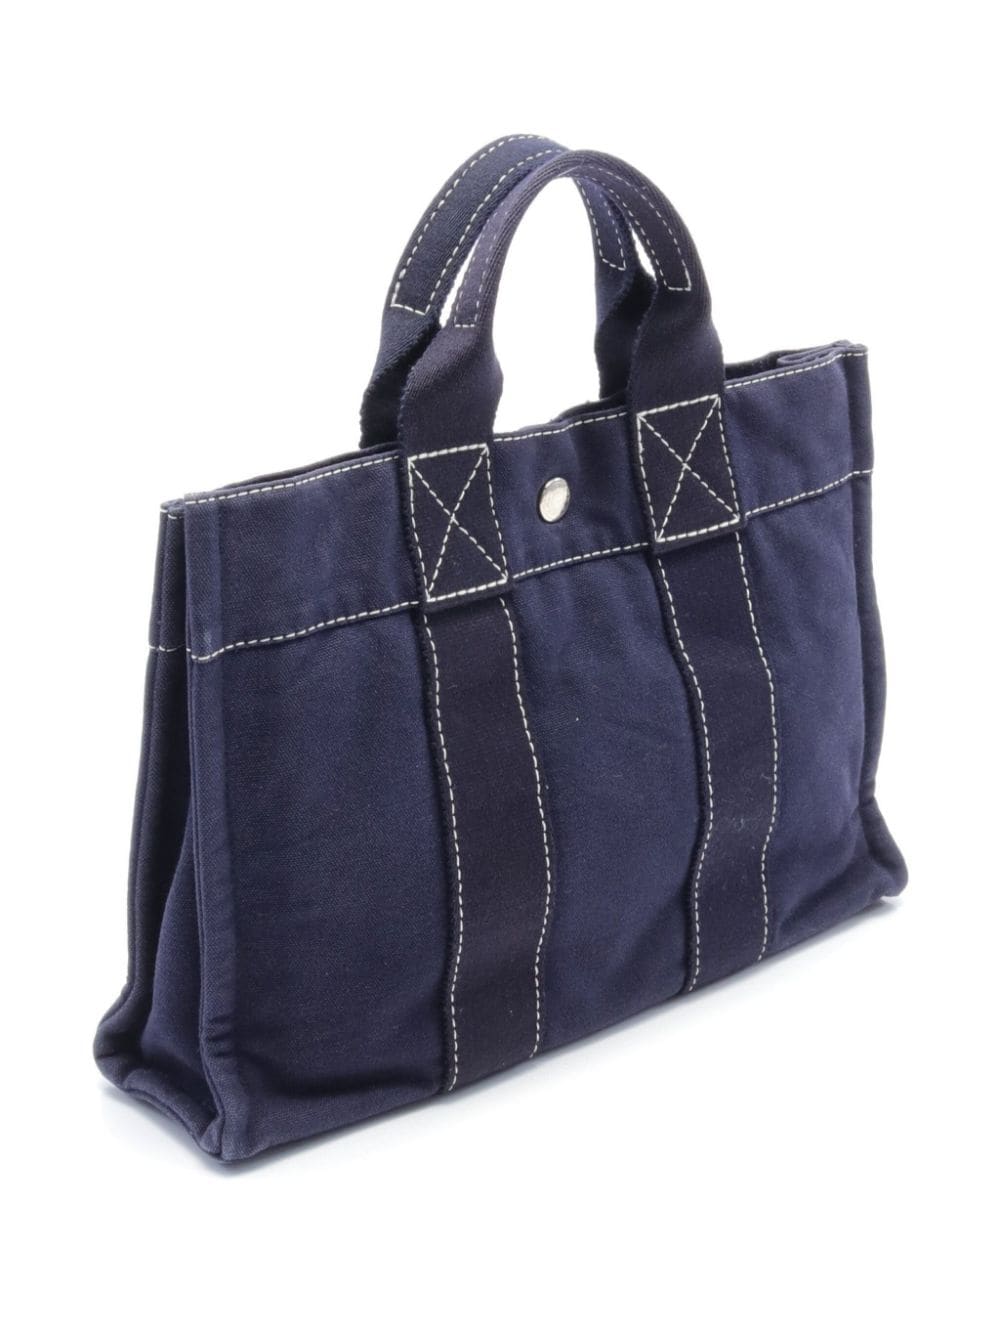 Hermès Pre-Owned 2000s Sac Deauville PM tote bag - Blauw